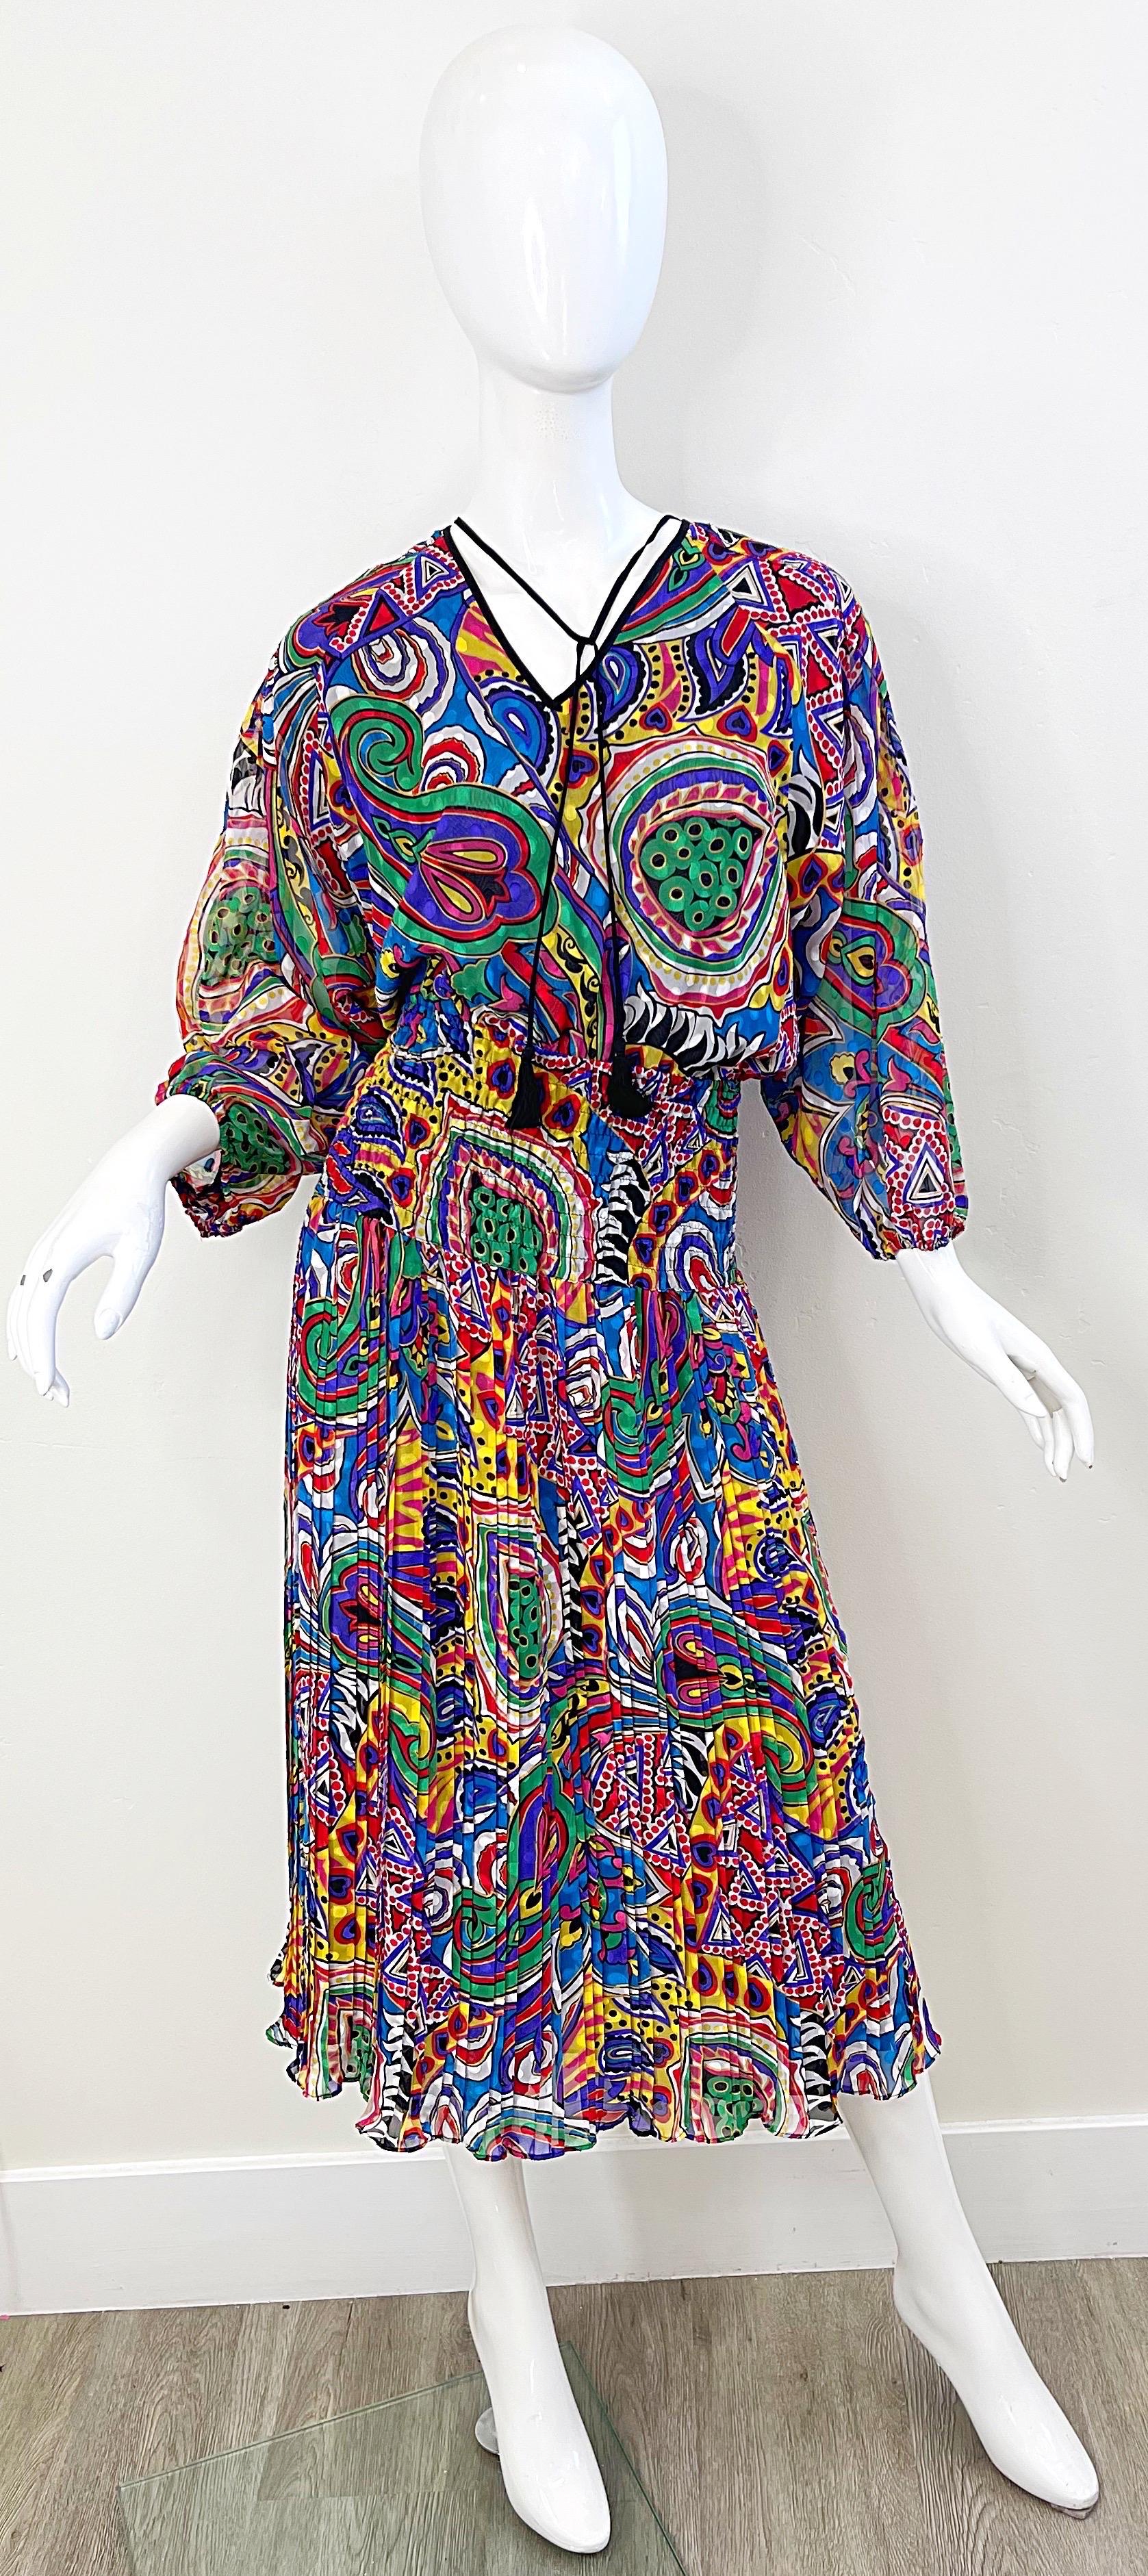 Gray Diane Freis 1980s Novelty Heart Paisley Psychedelic Print Vintage 80s Dress For Sale